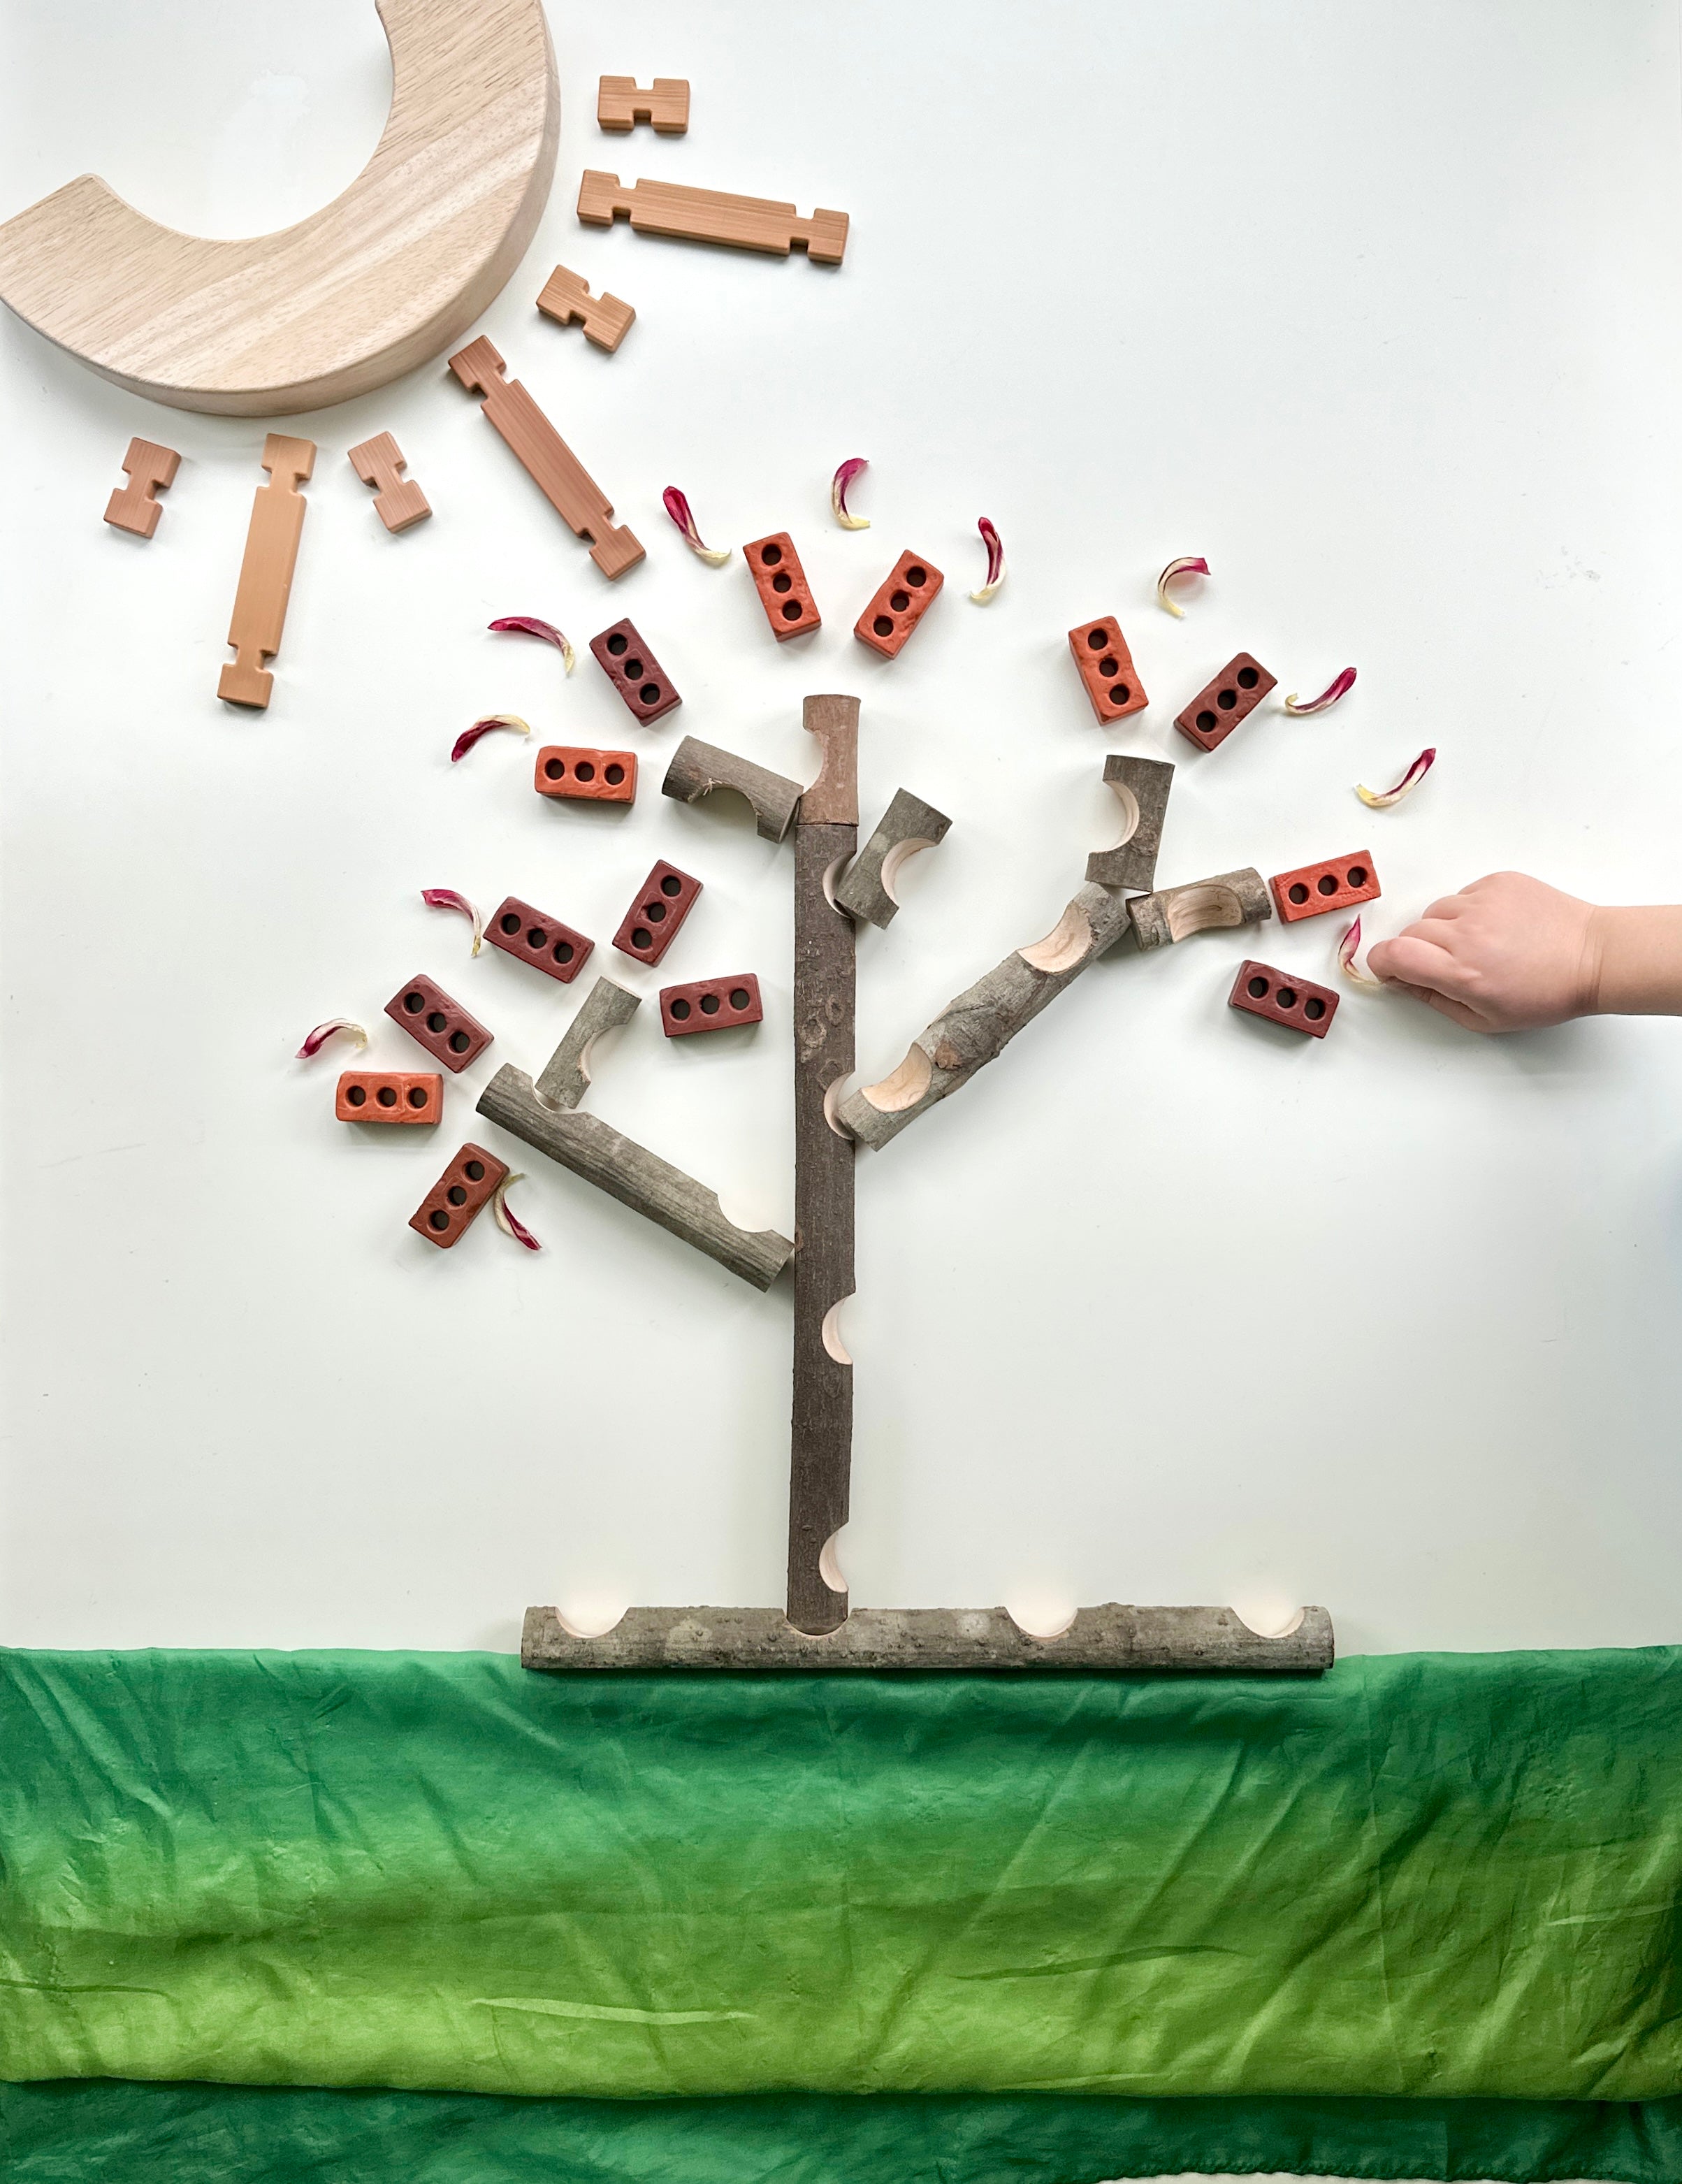 Inspire Hands-On Learning Through Loose Parts Play